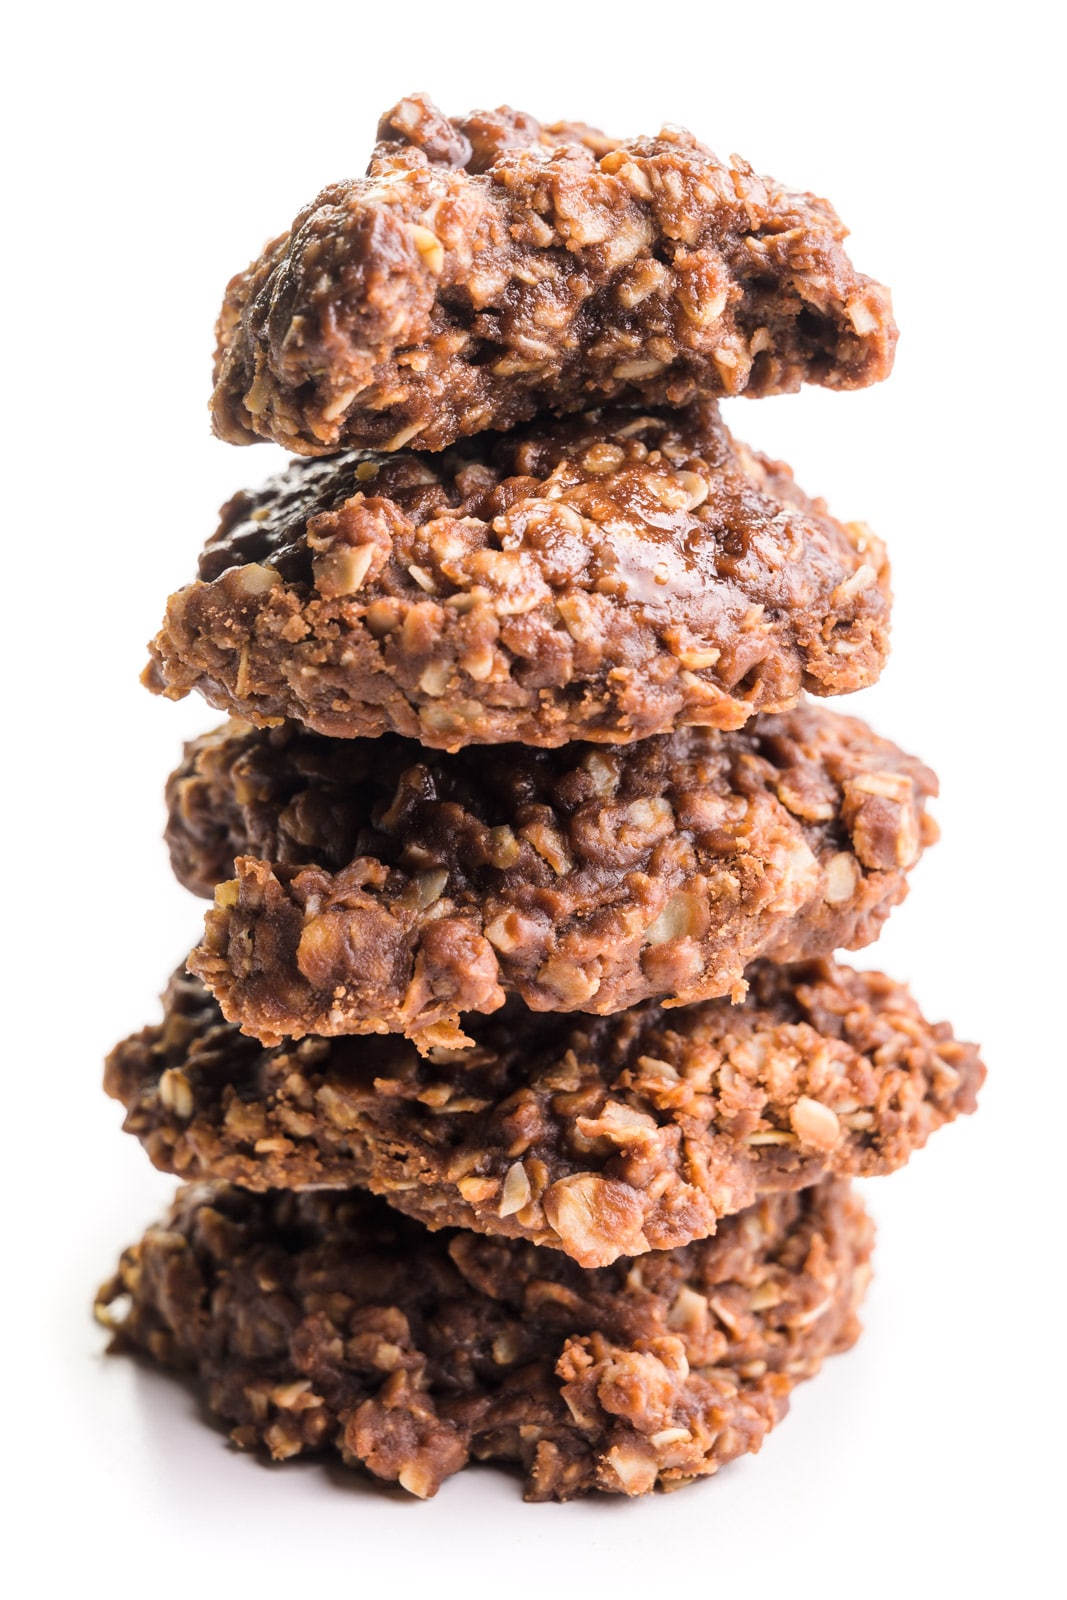 A stack of vegan no-bake cookies shows the top one with a bite taken out.